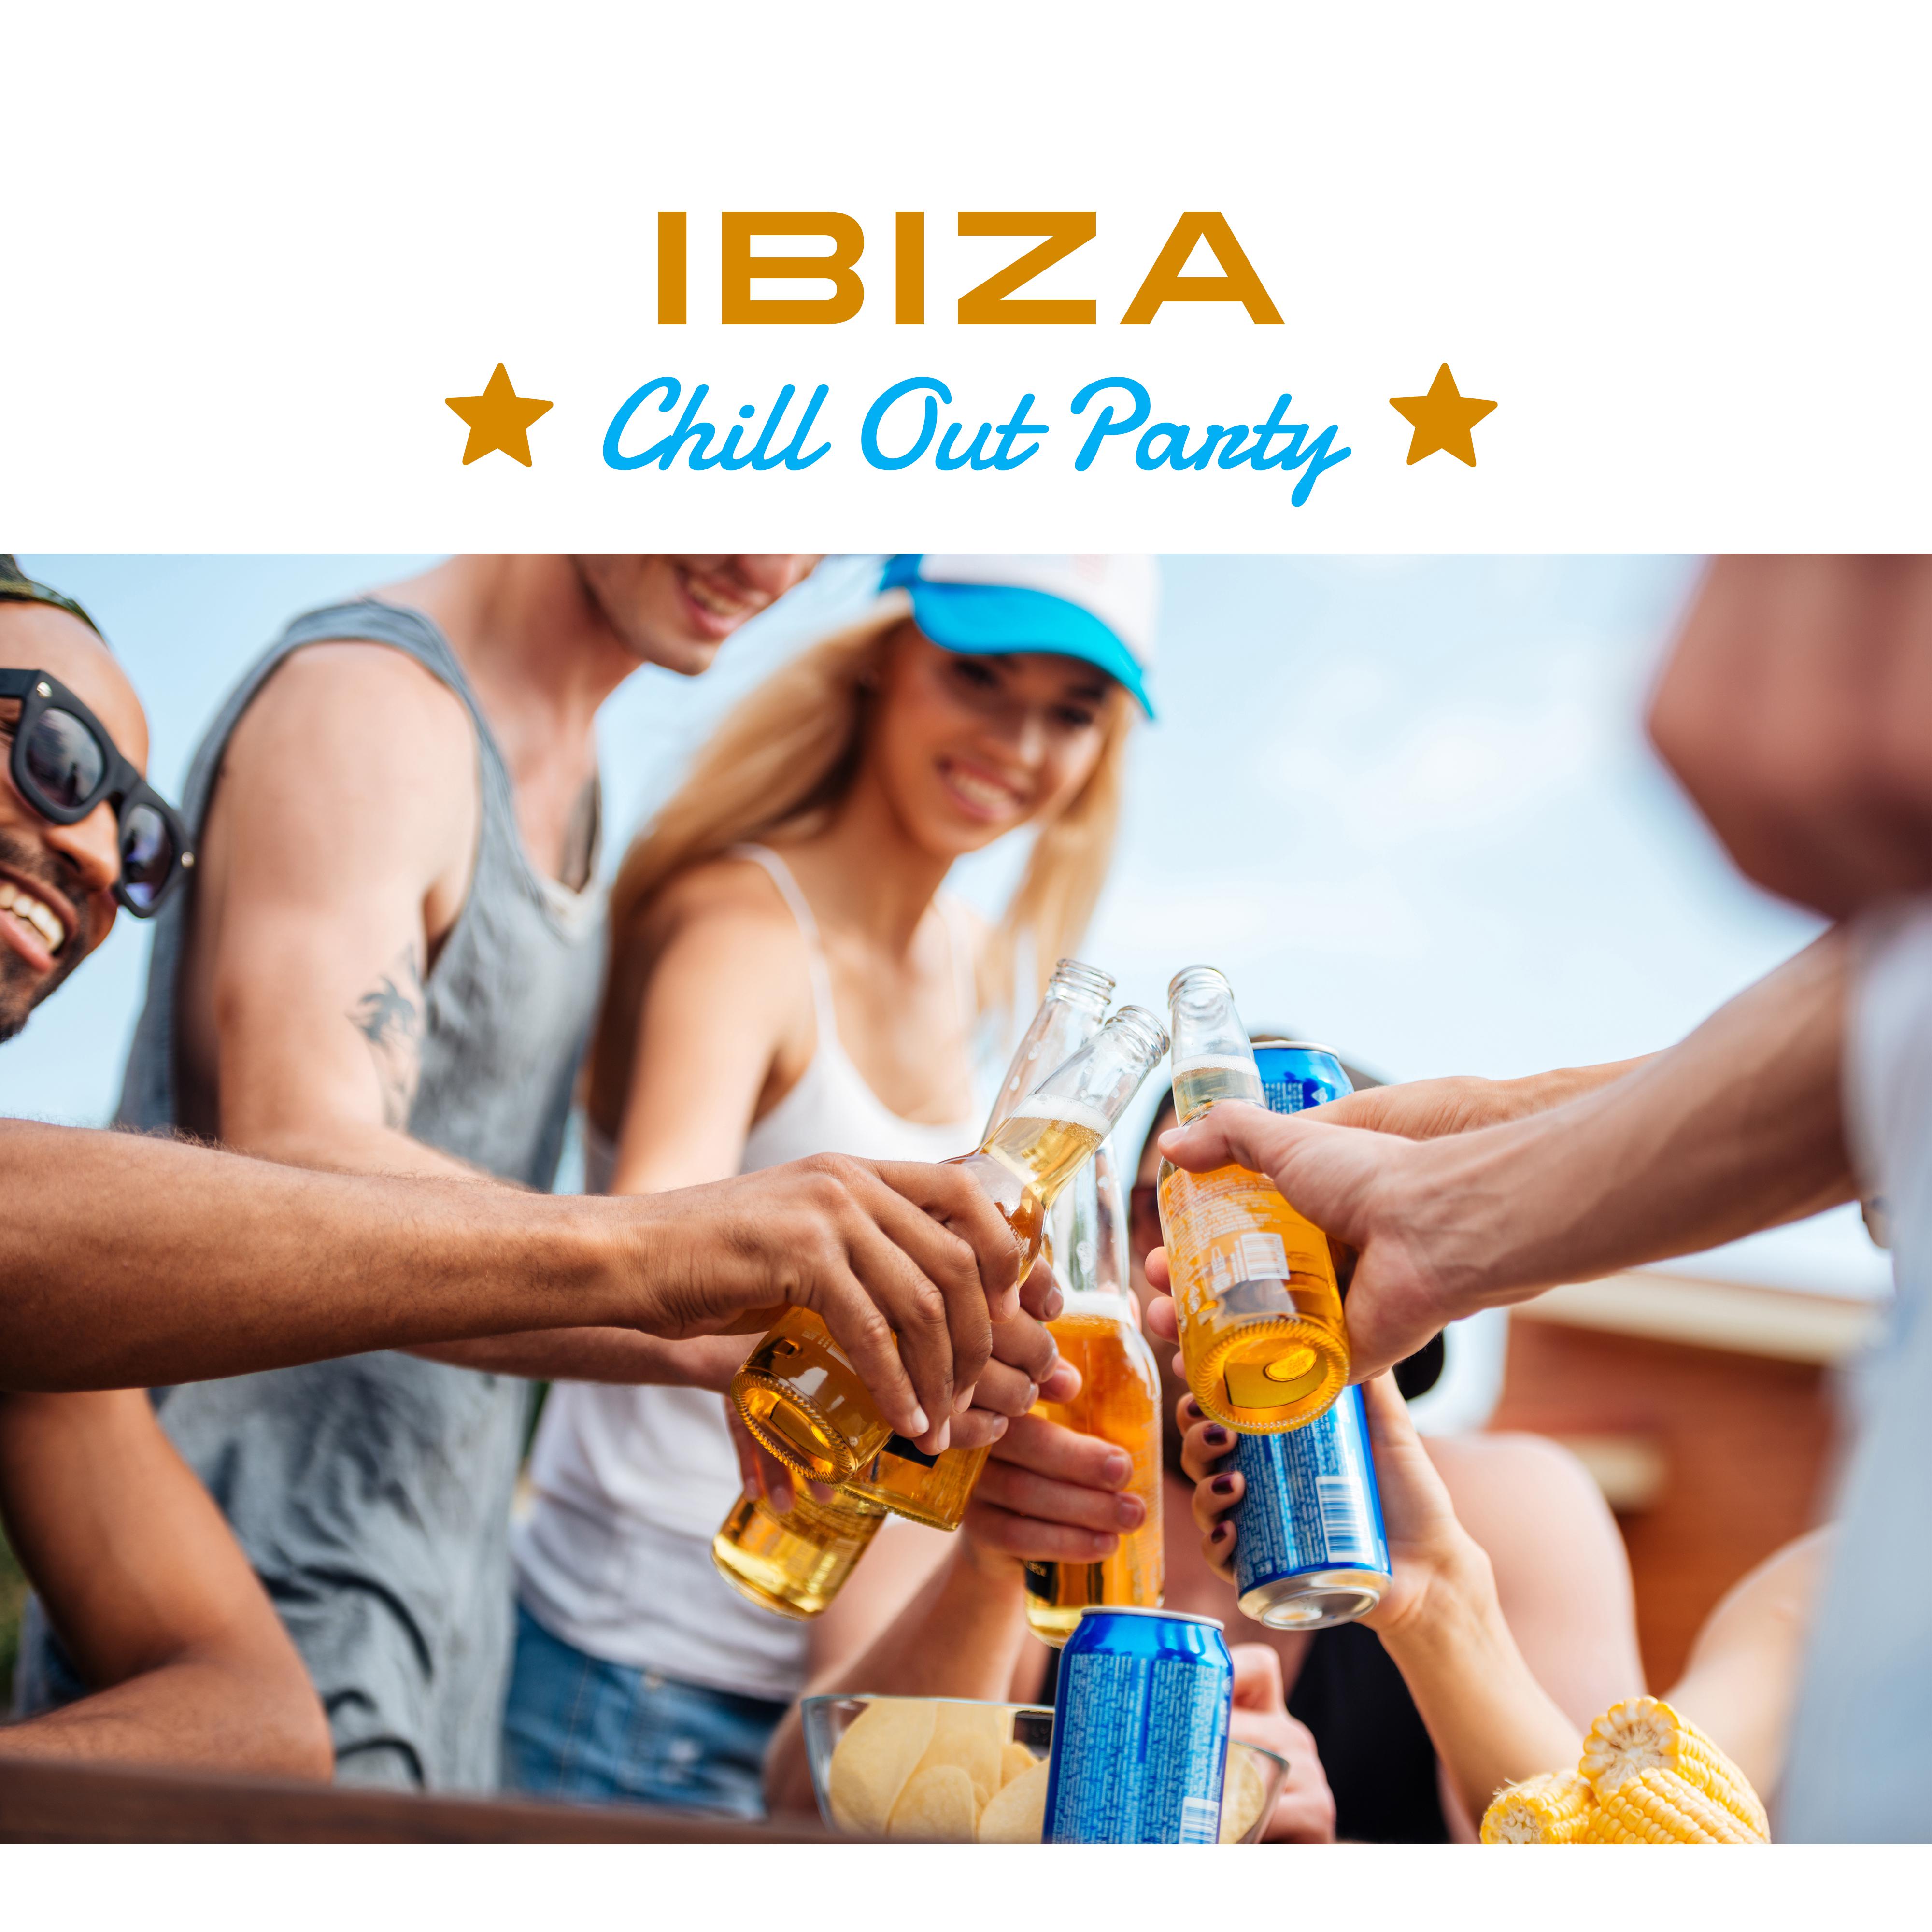 Ibiza Chill Out Party – Summertime, Drink Bar, Disco Beach, Summer Chill, Holiday Songs, Good Mood, Sensual Dance, Best Chill Out Music